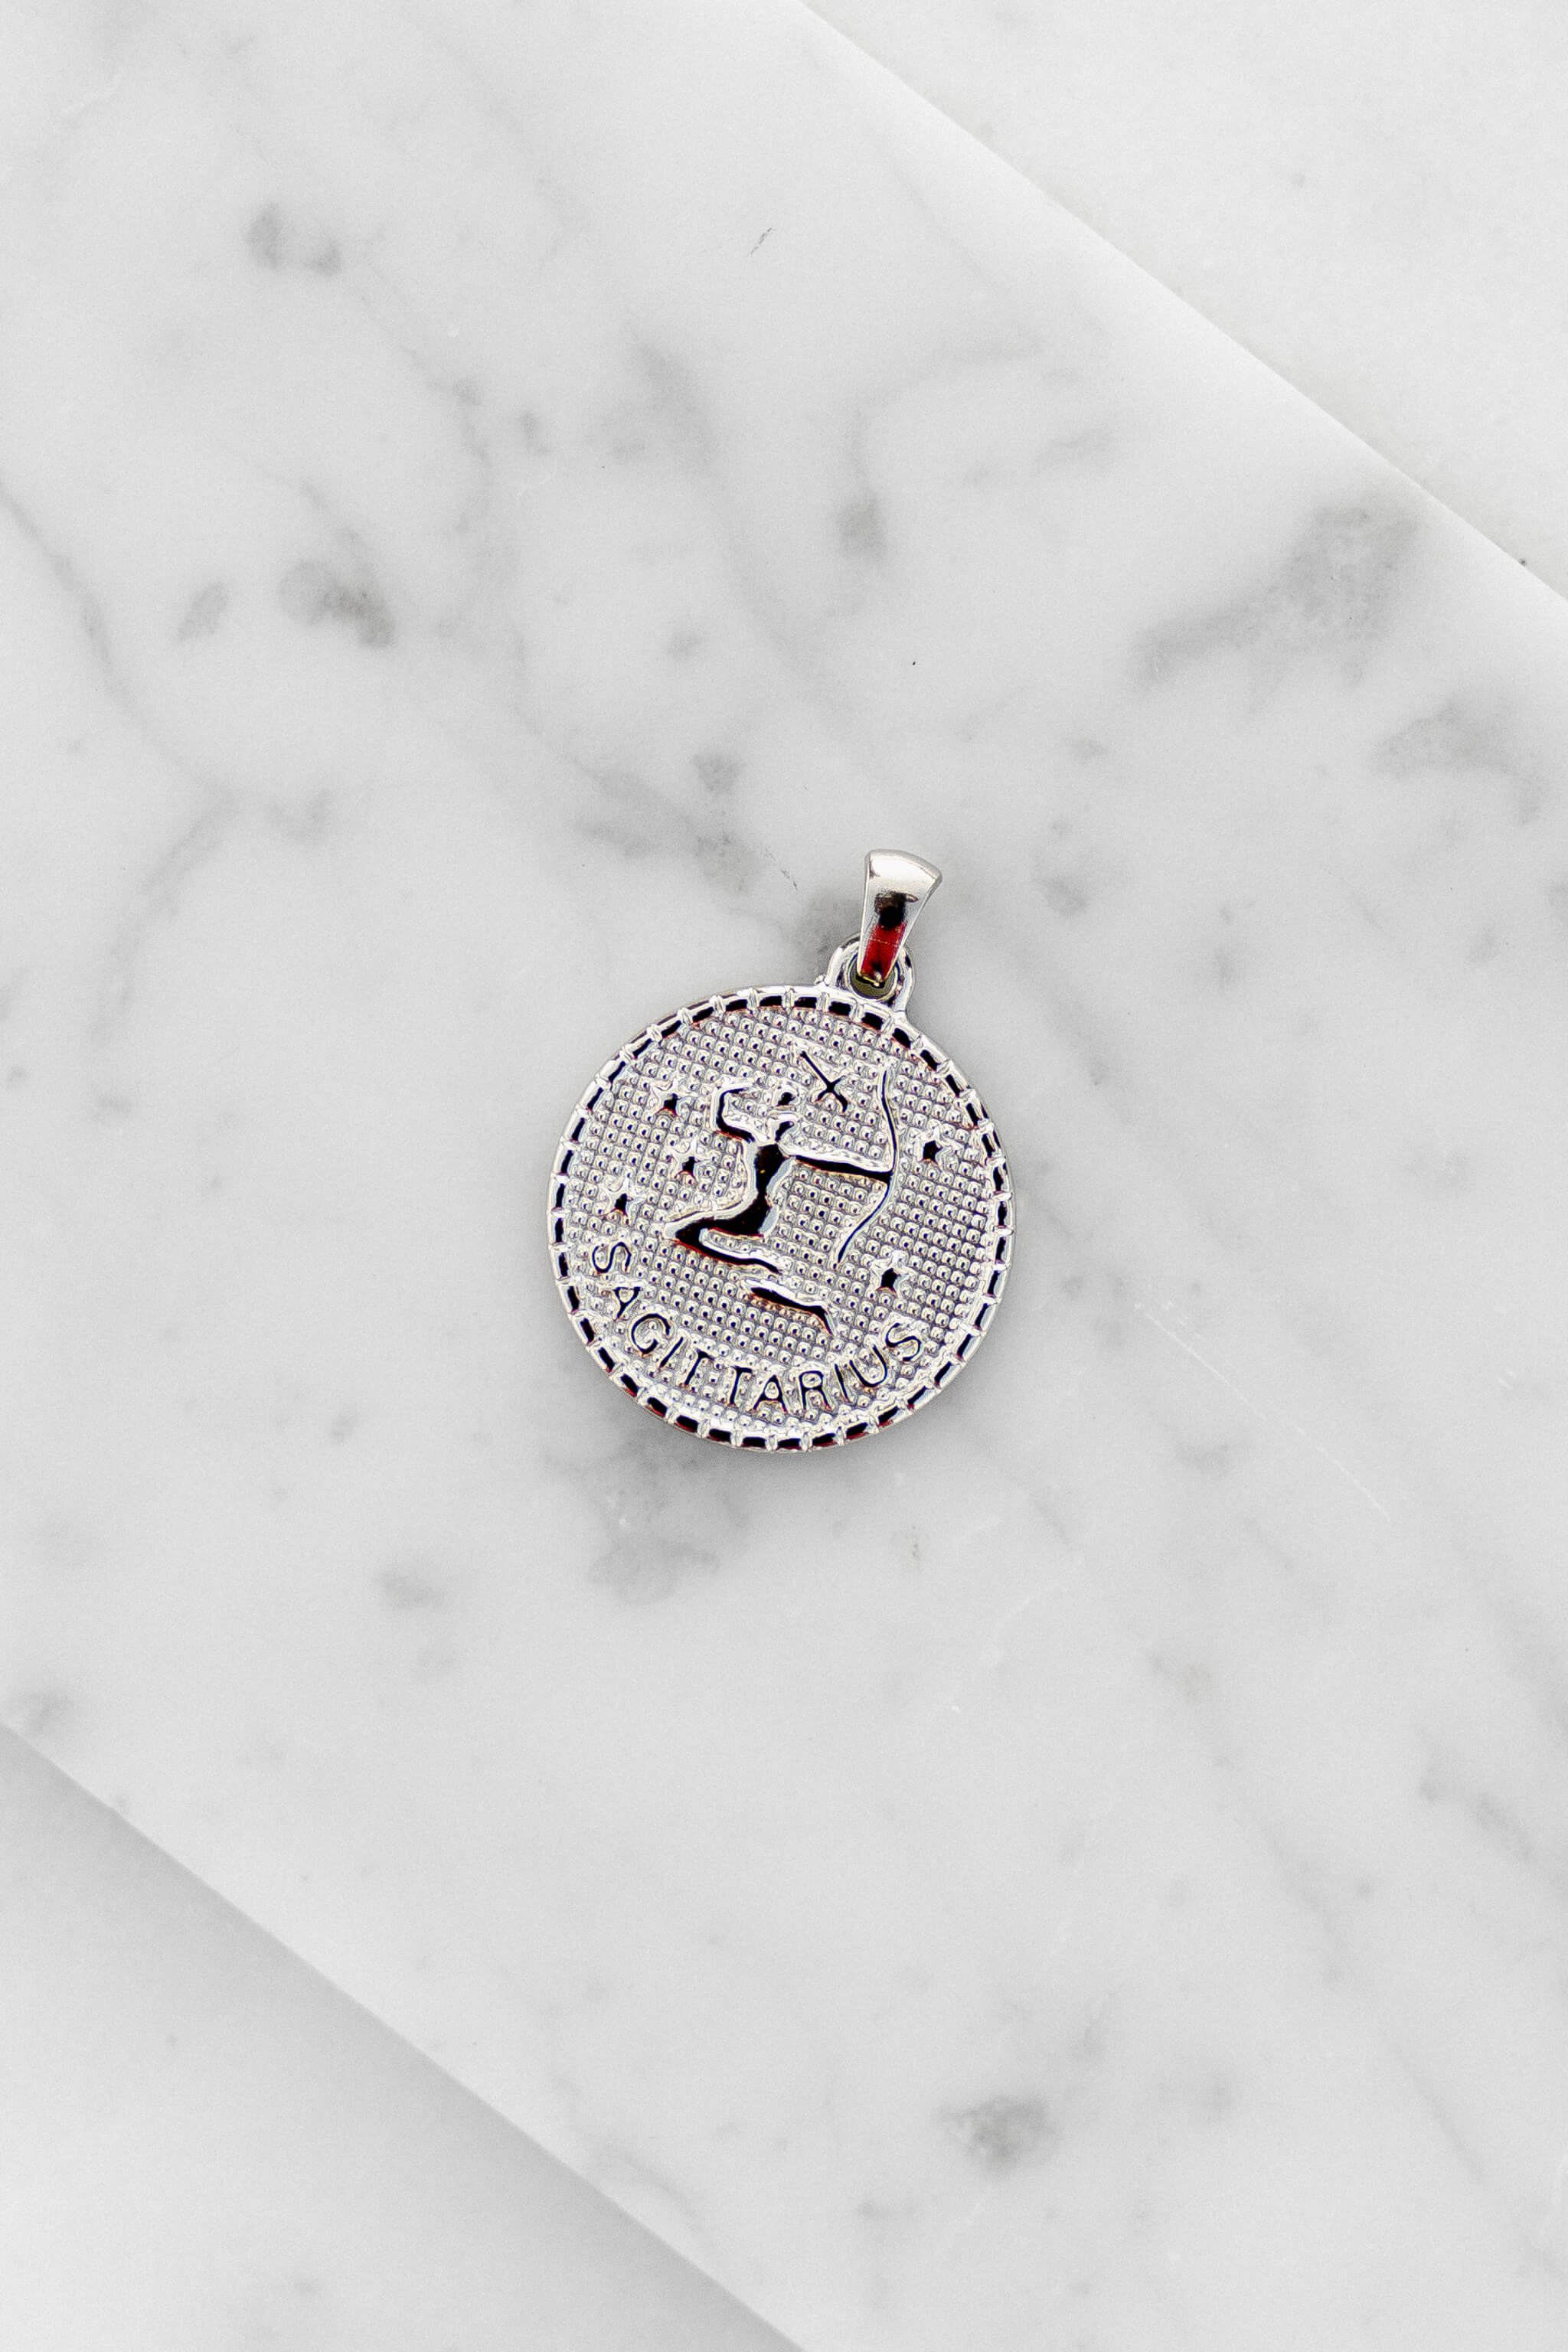 Sagittarius zodiac sign silver coin charm laying on a white marble